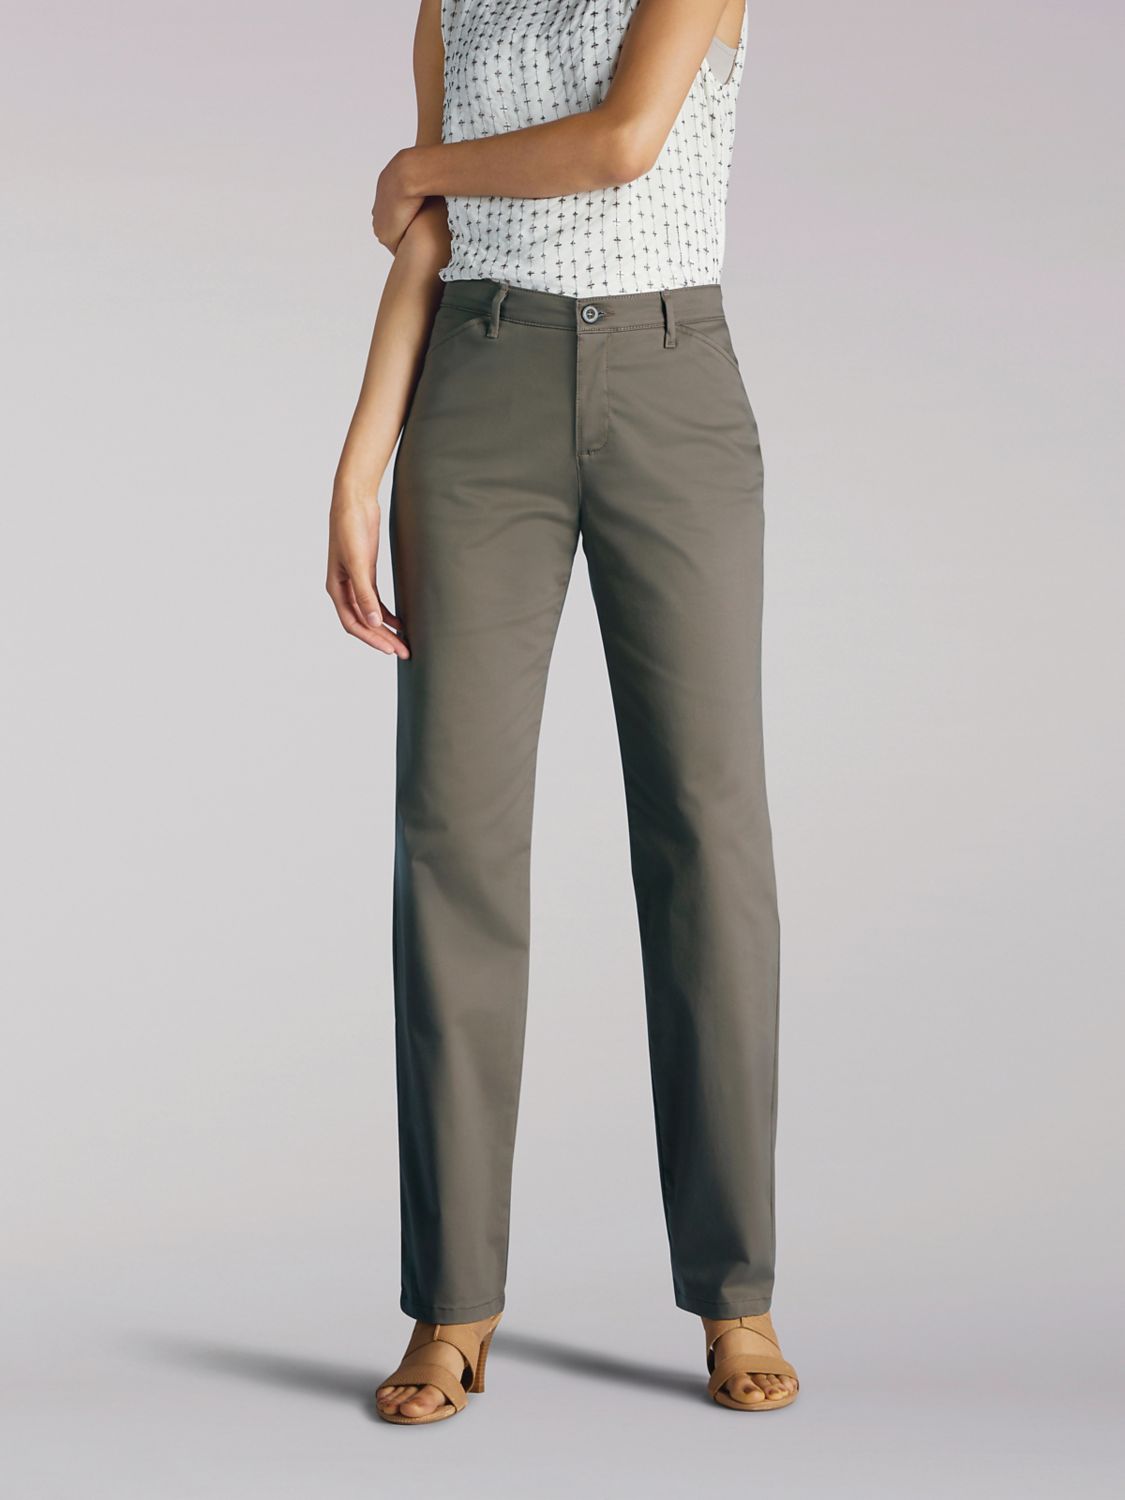 https://www.outdoorequipped.com/cdn/shop/products/Women_s_20Lee_20Relaxed_20Fit_20Straight_20Leg_20Pant_20All_20Day_20Work_20Pant_20Deep_20Breen.jpg?v=1597951937